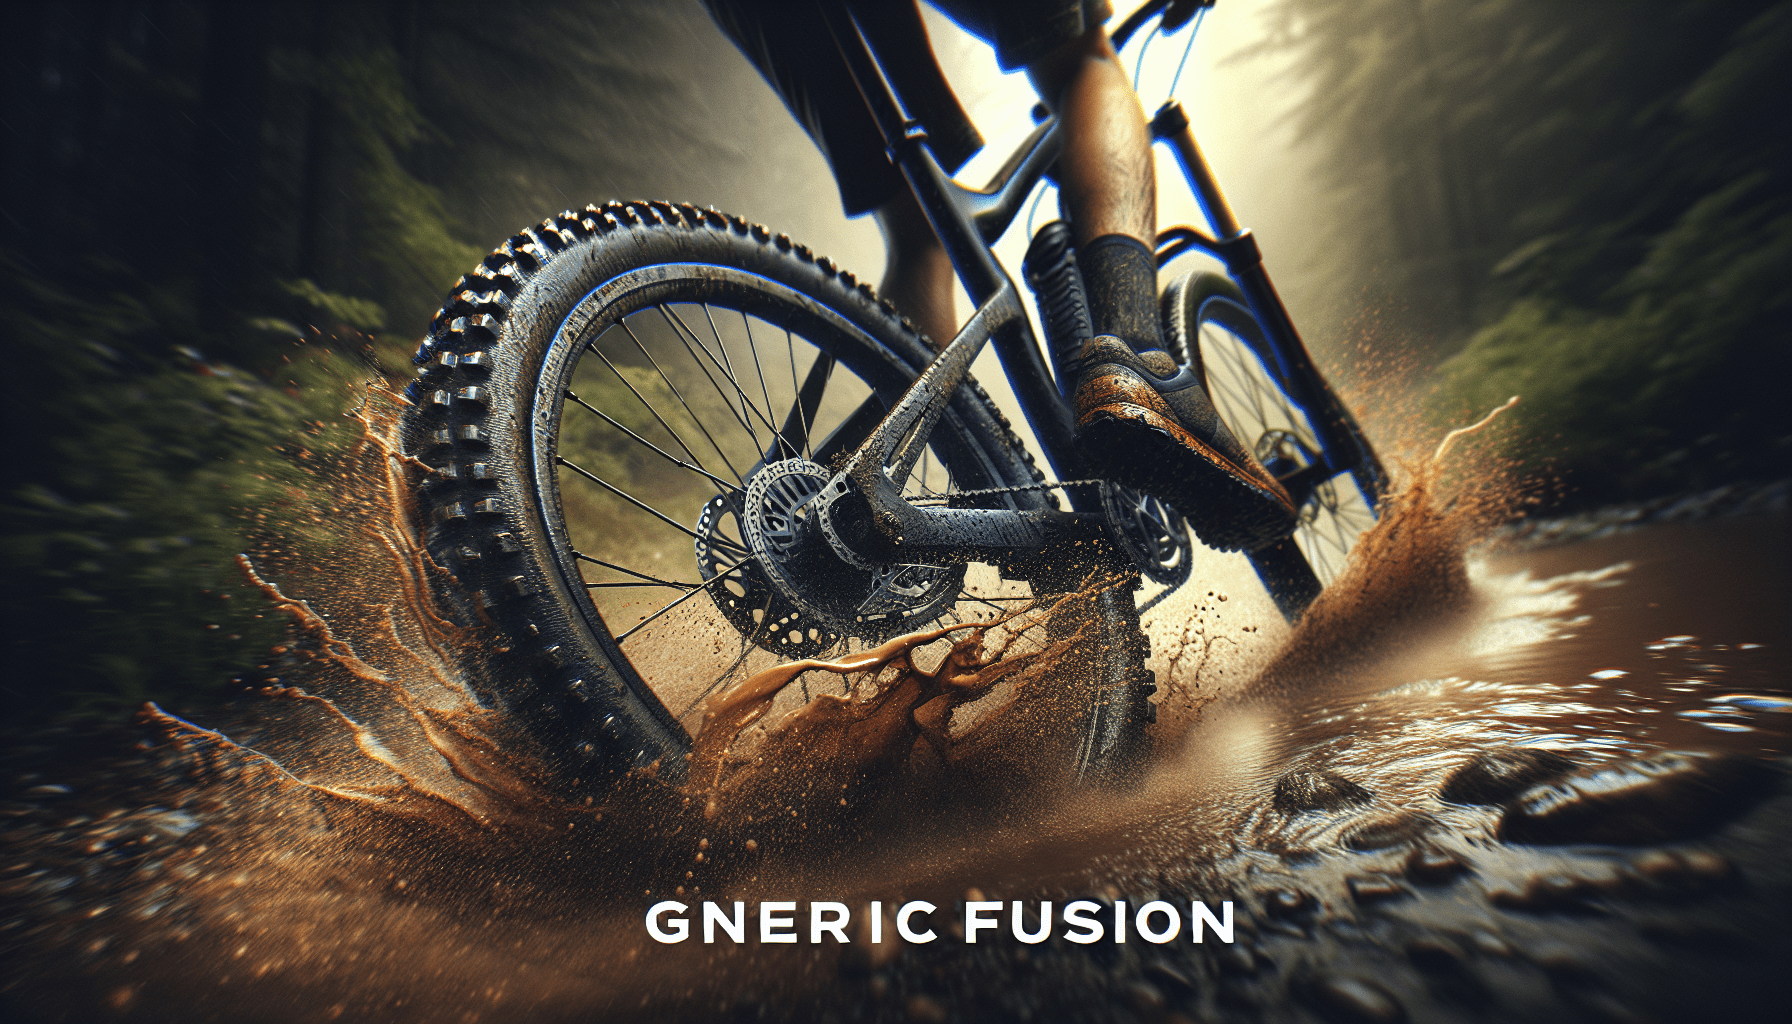 Trail Warriors Wanted: Top 3 Reilly Fusion Bikes – Get Yours Today!